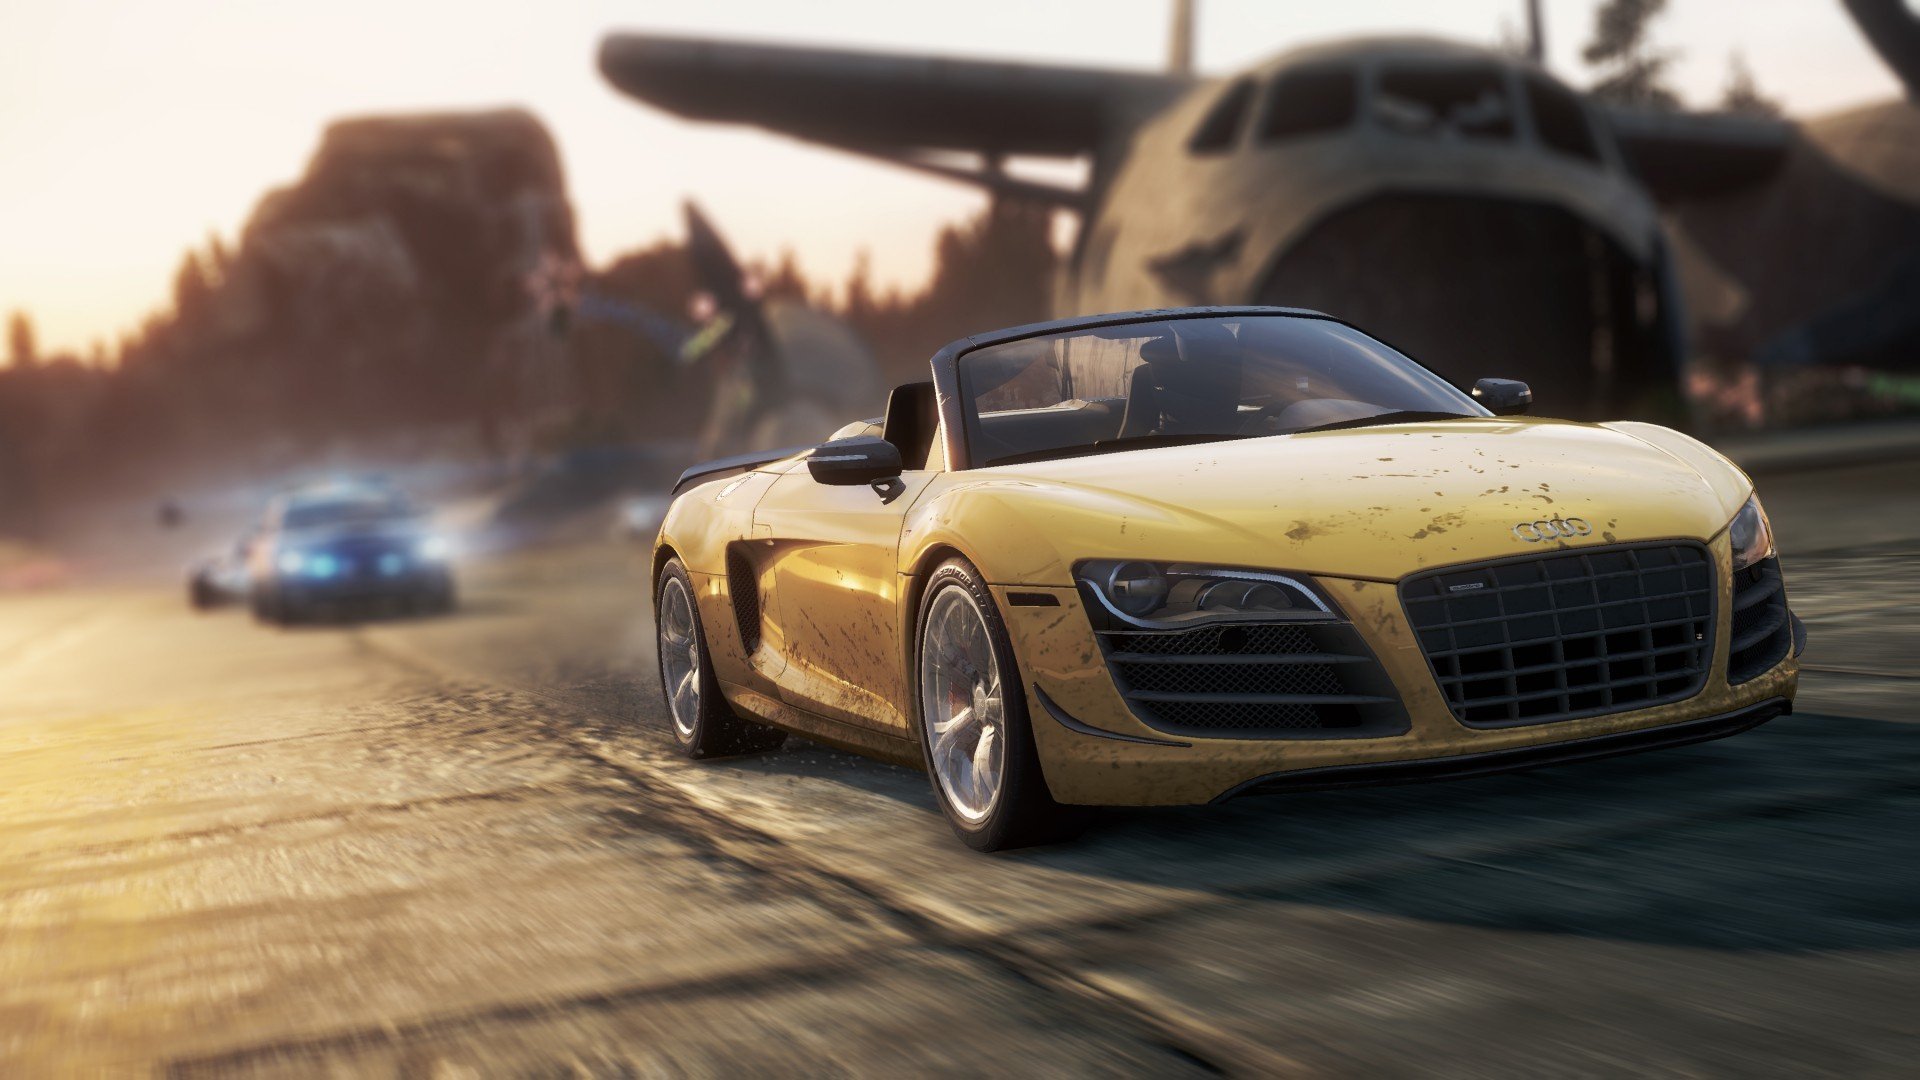 Best Need For Speed: Most Wanted wallpaper ID:137088 for High Resolution full hd 1920x1080 computer